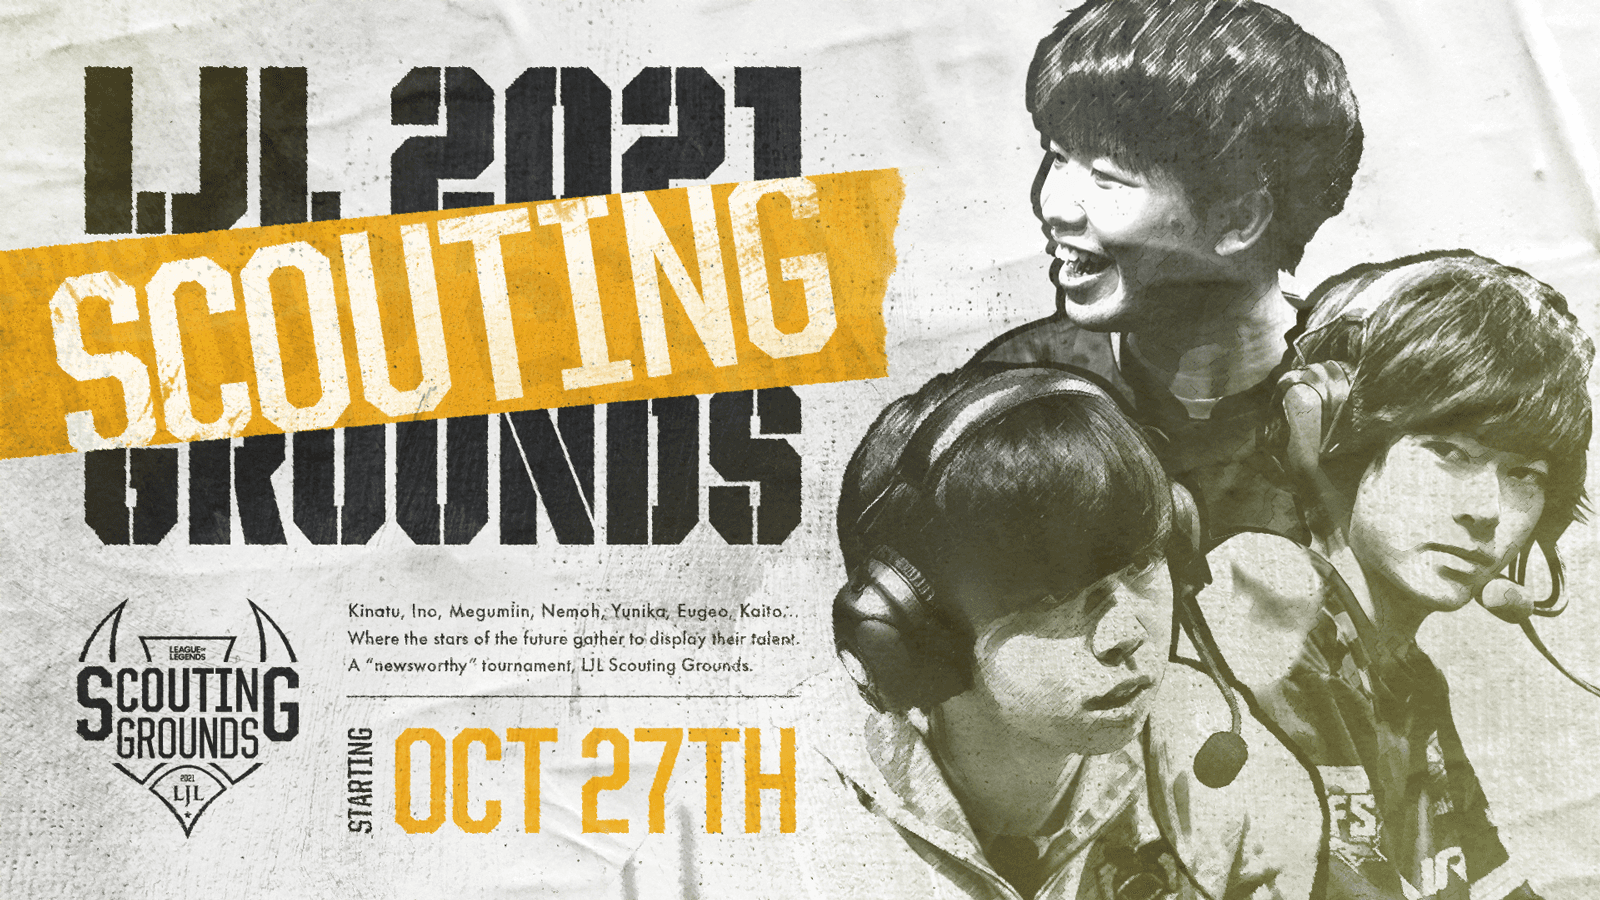 LJL 2021 Scouting Grounds feature image